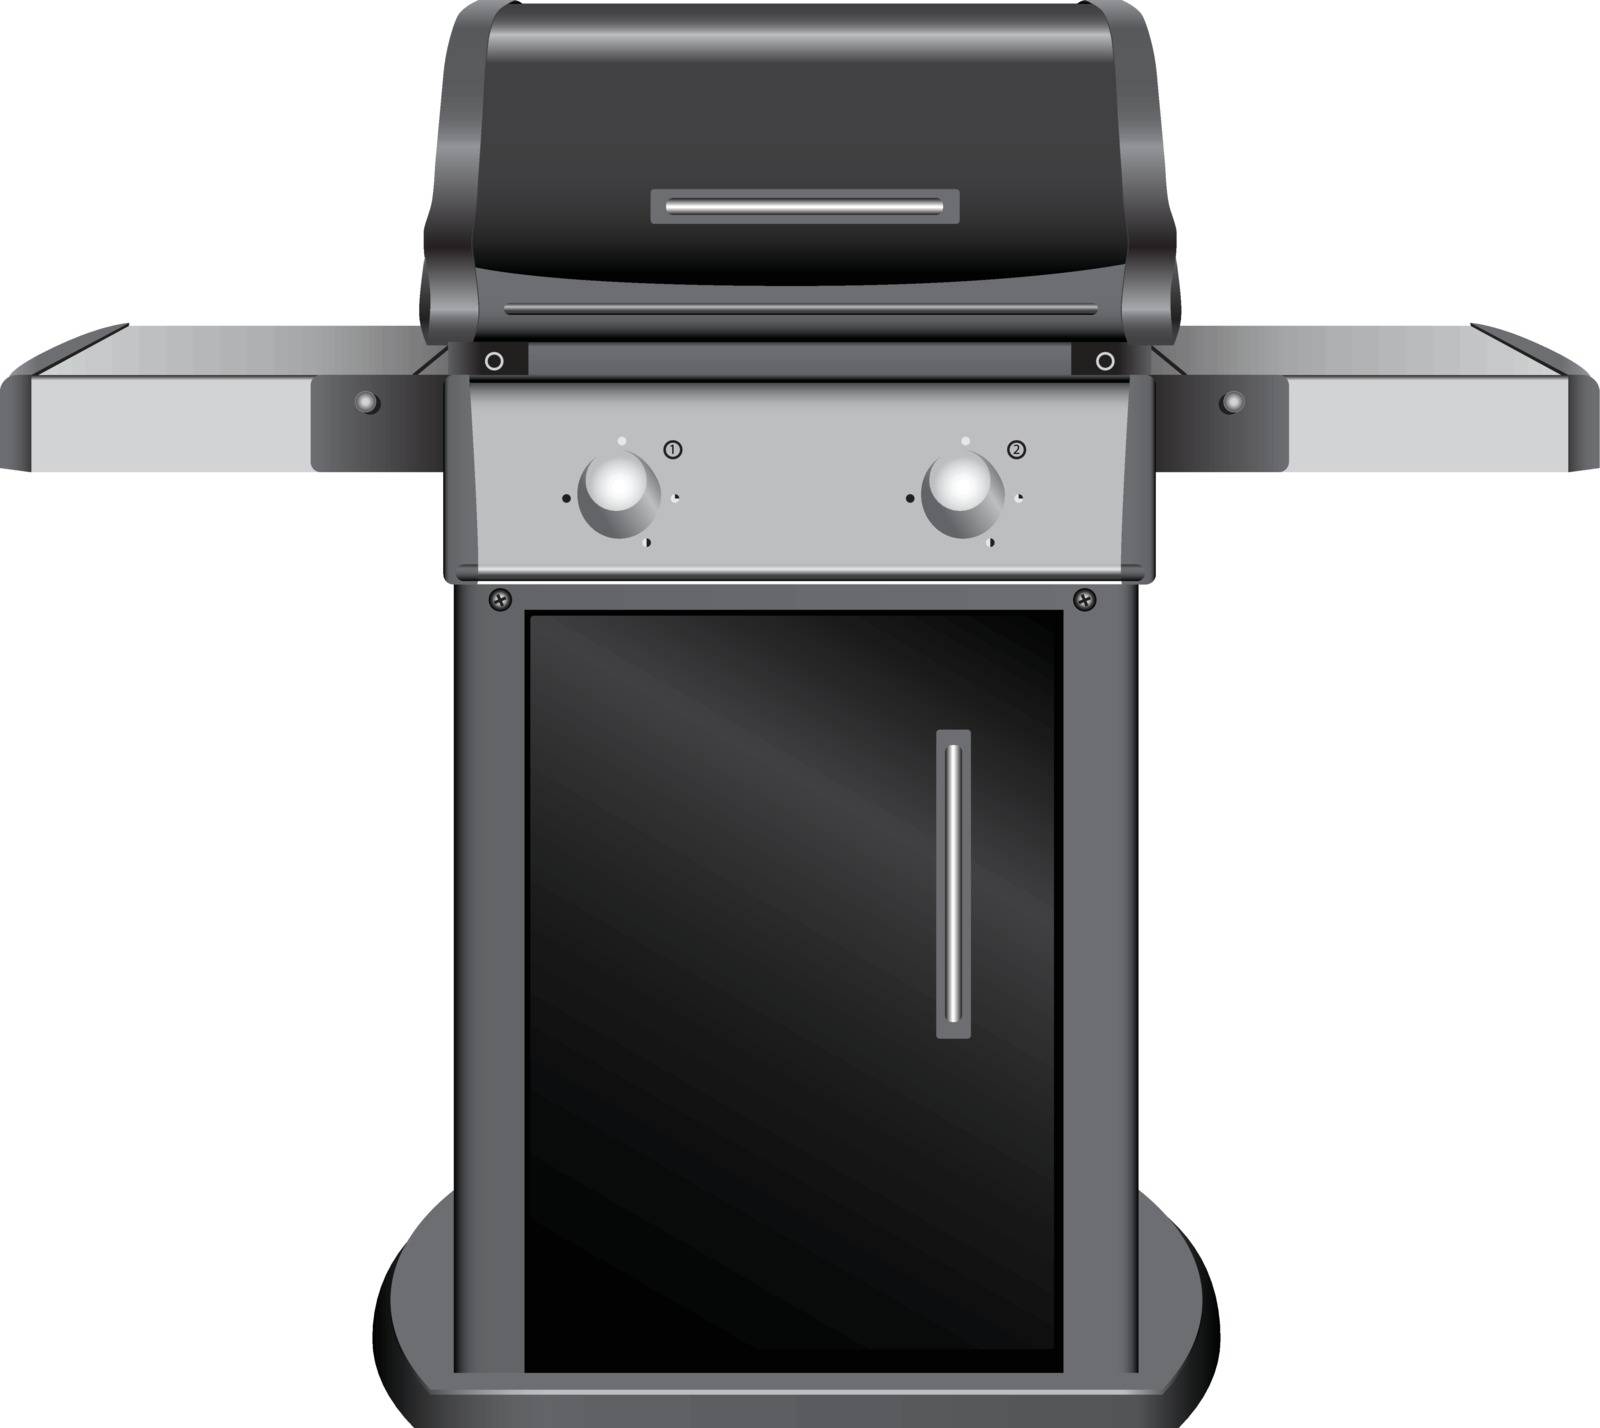 Stationary grill with shelves for inventory. Vector illustration.